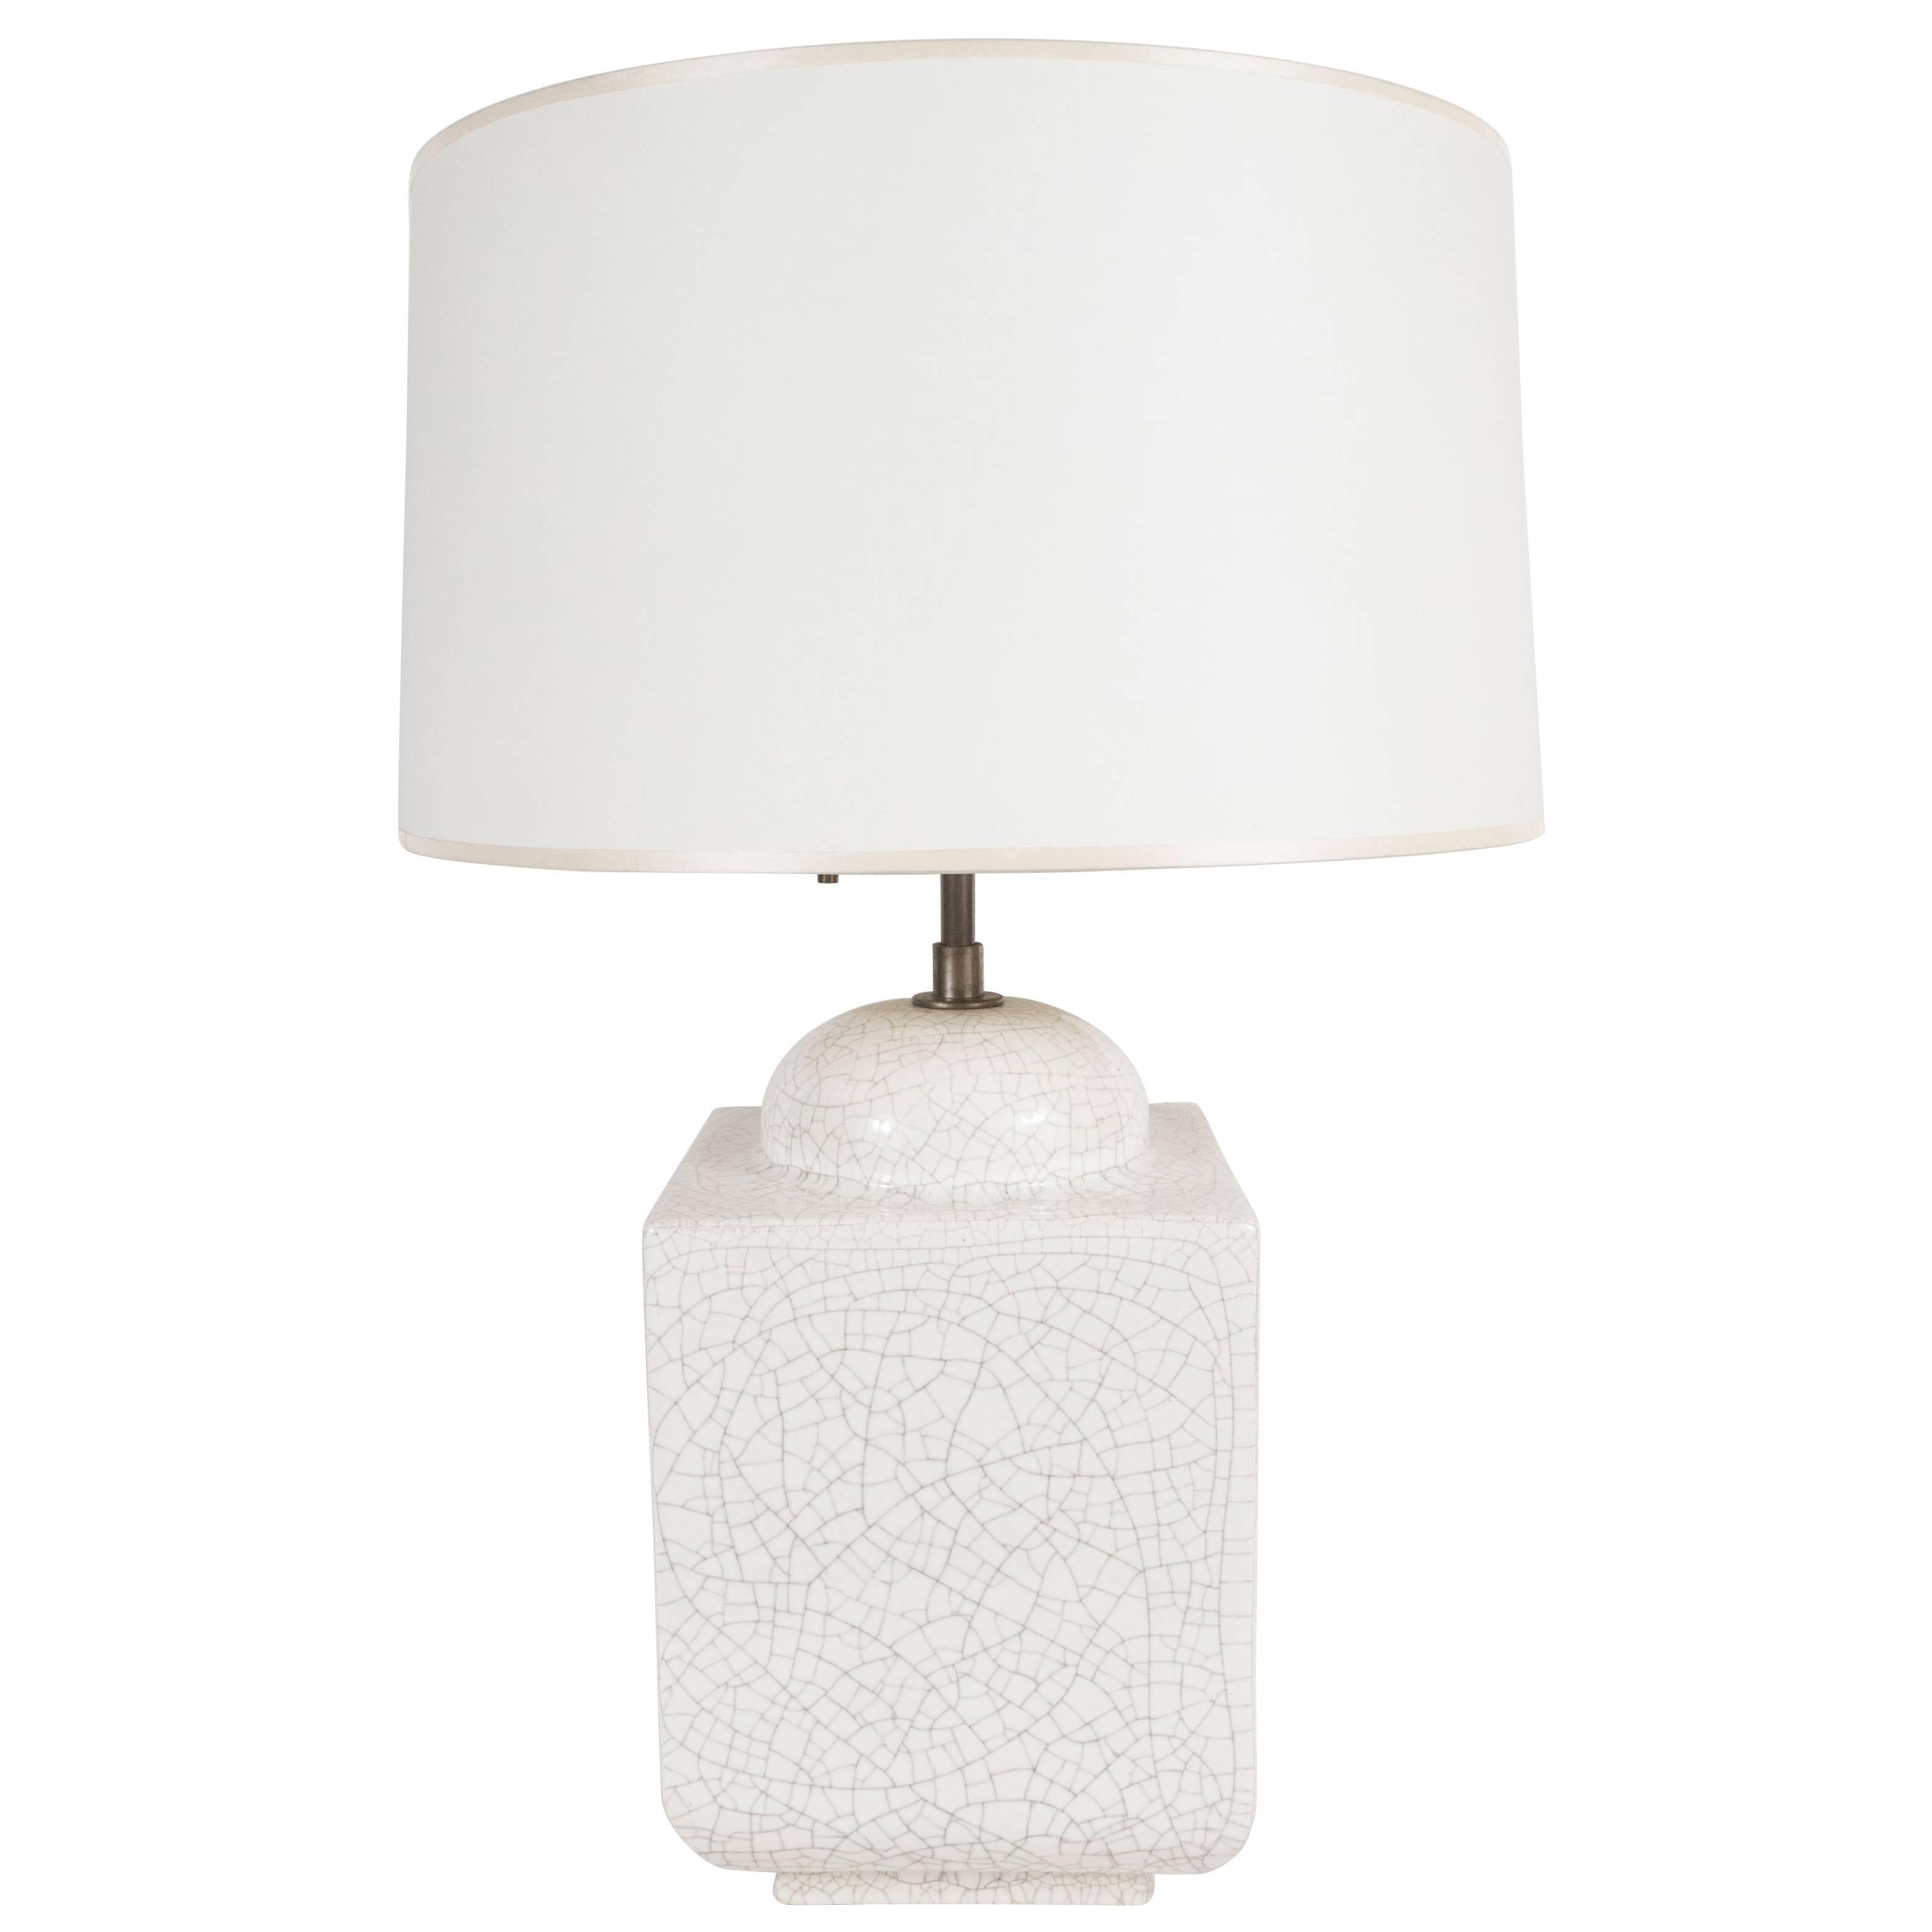 Square Molded Ceramic Table Lamp For Sale